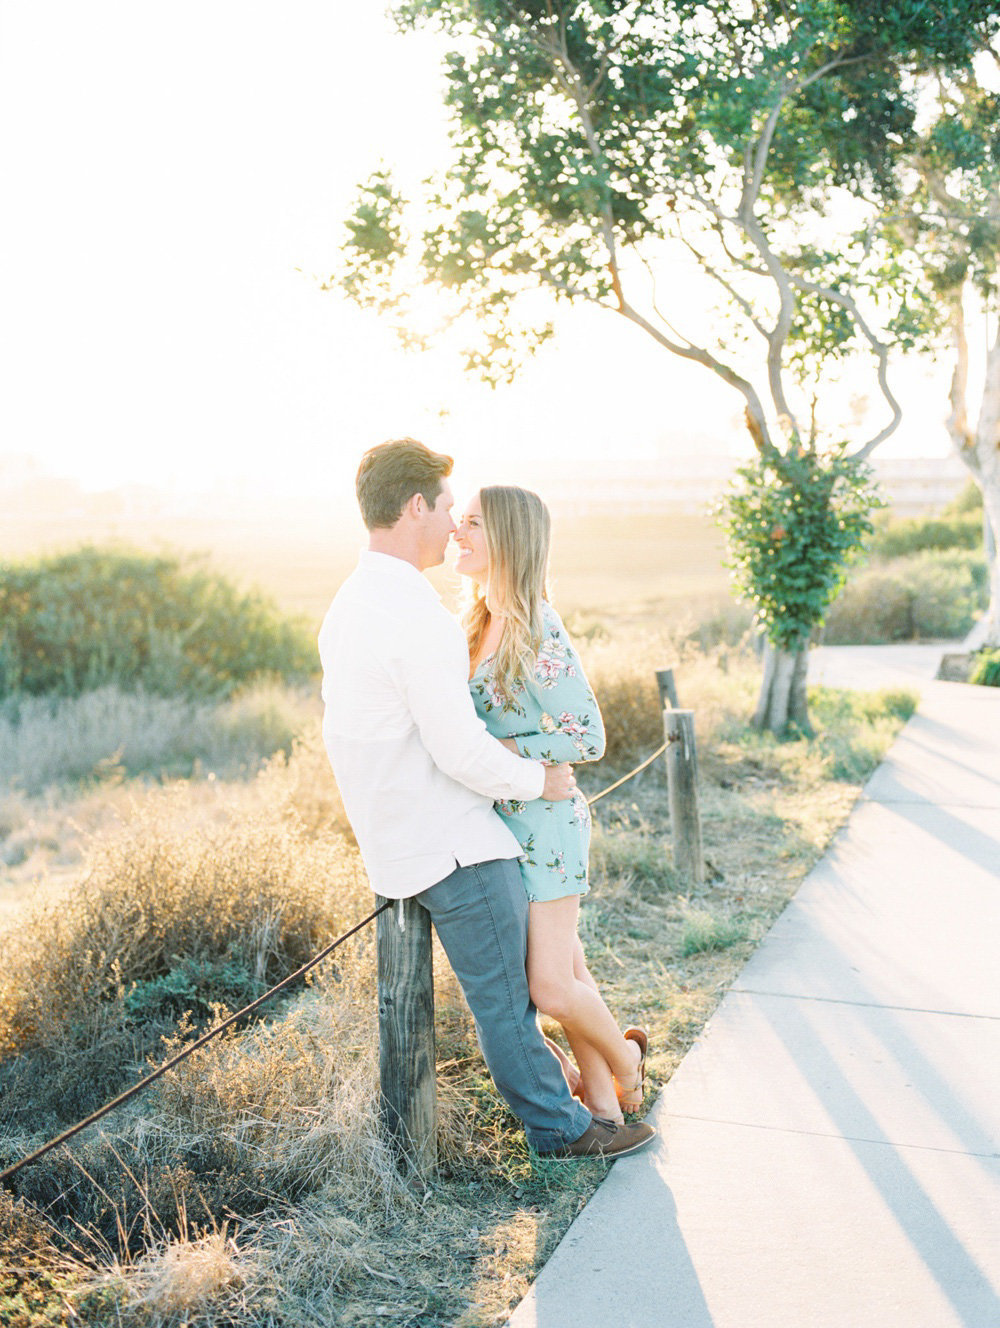 San-Diego-Engagement-Photographer-Mandy-Ford-007